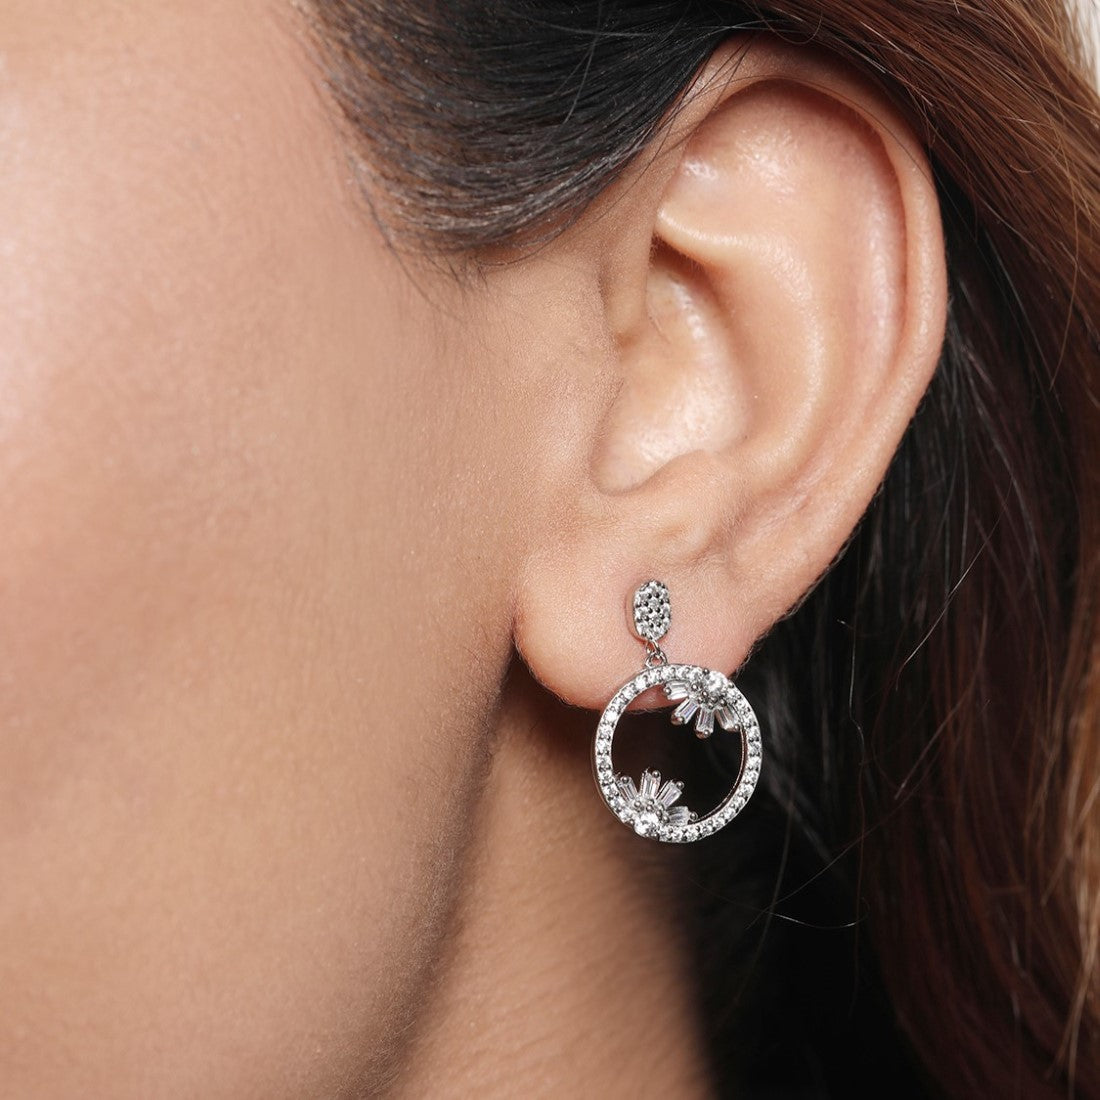 Sparkling Circle 925 Sterling Silver Rhodium-Plated Earrings